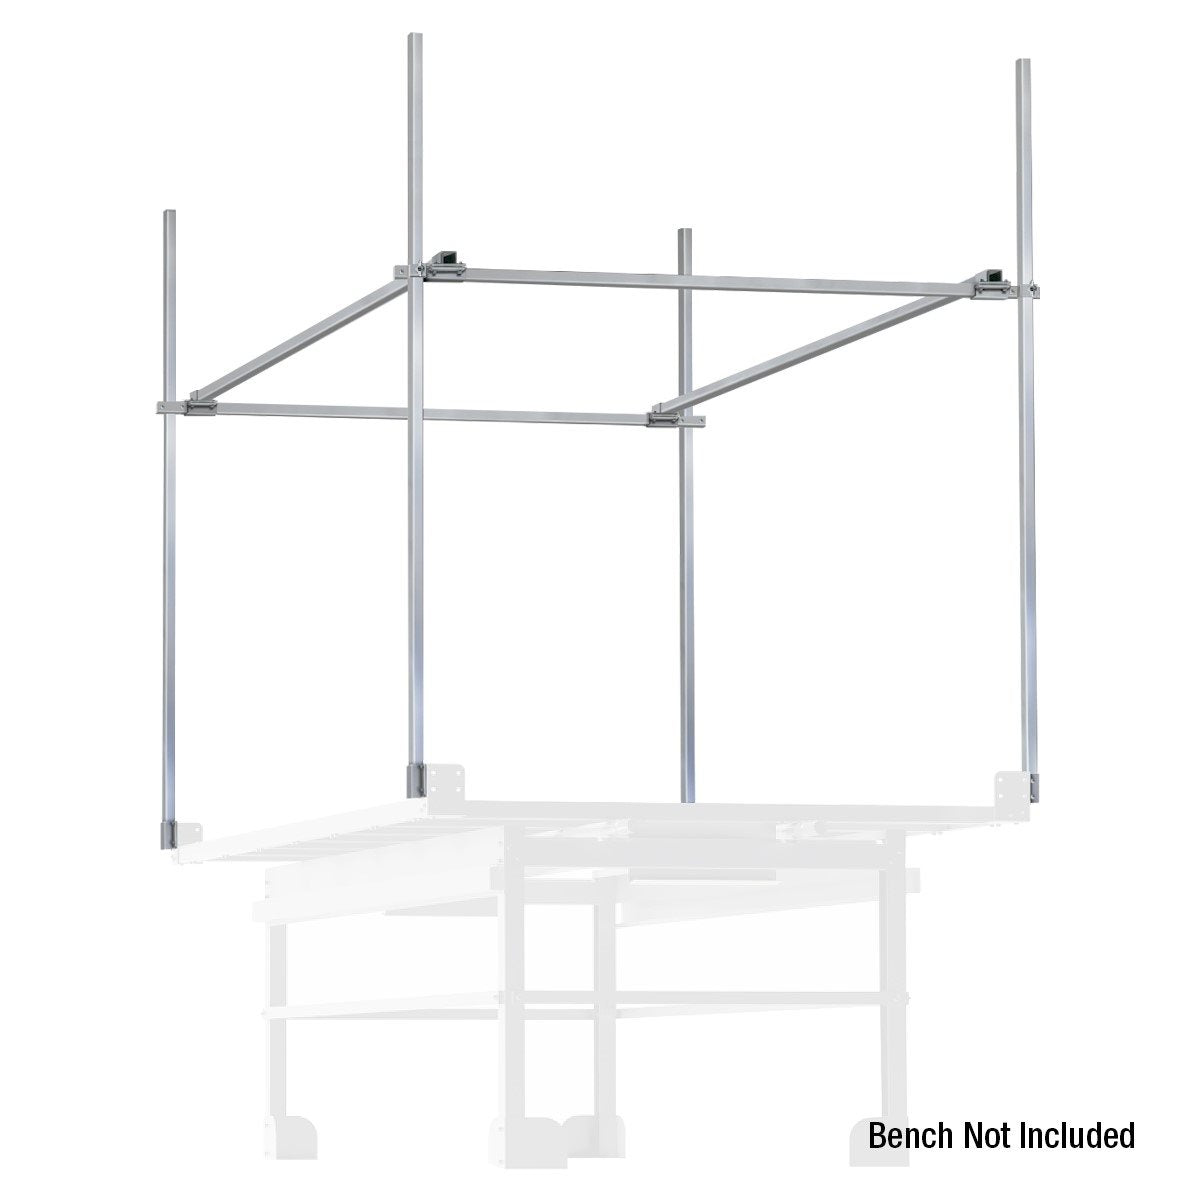 Product Image:Trellis Netting Support System 4' x 8' for XTrays Bench